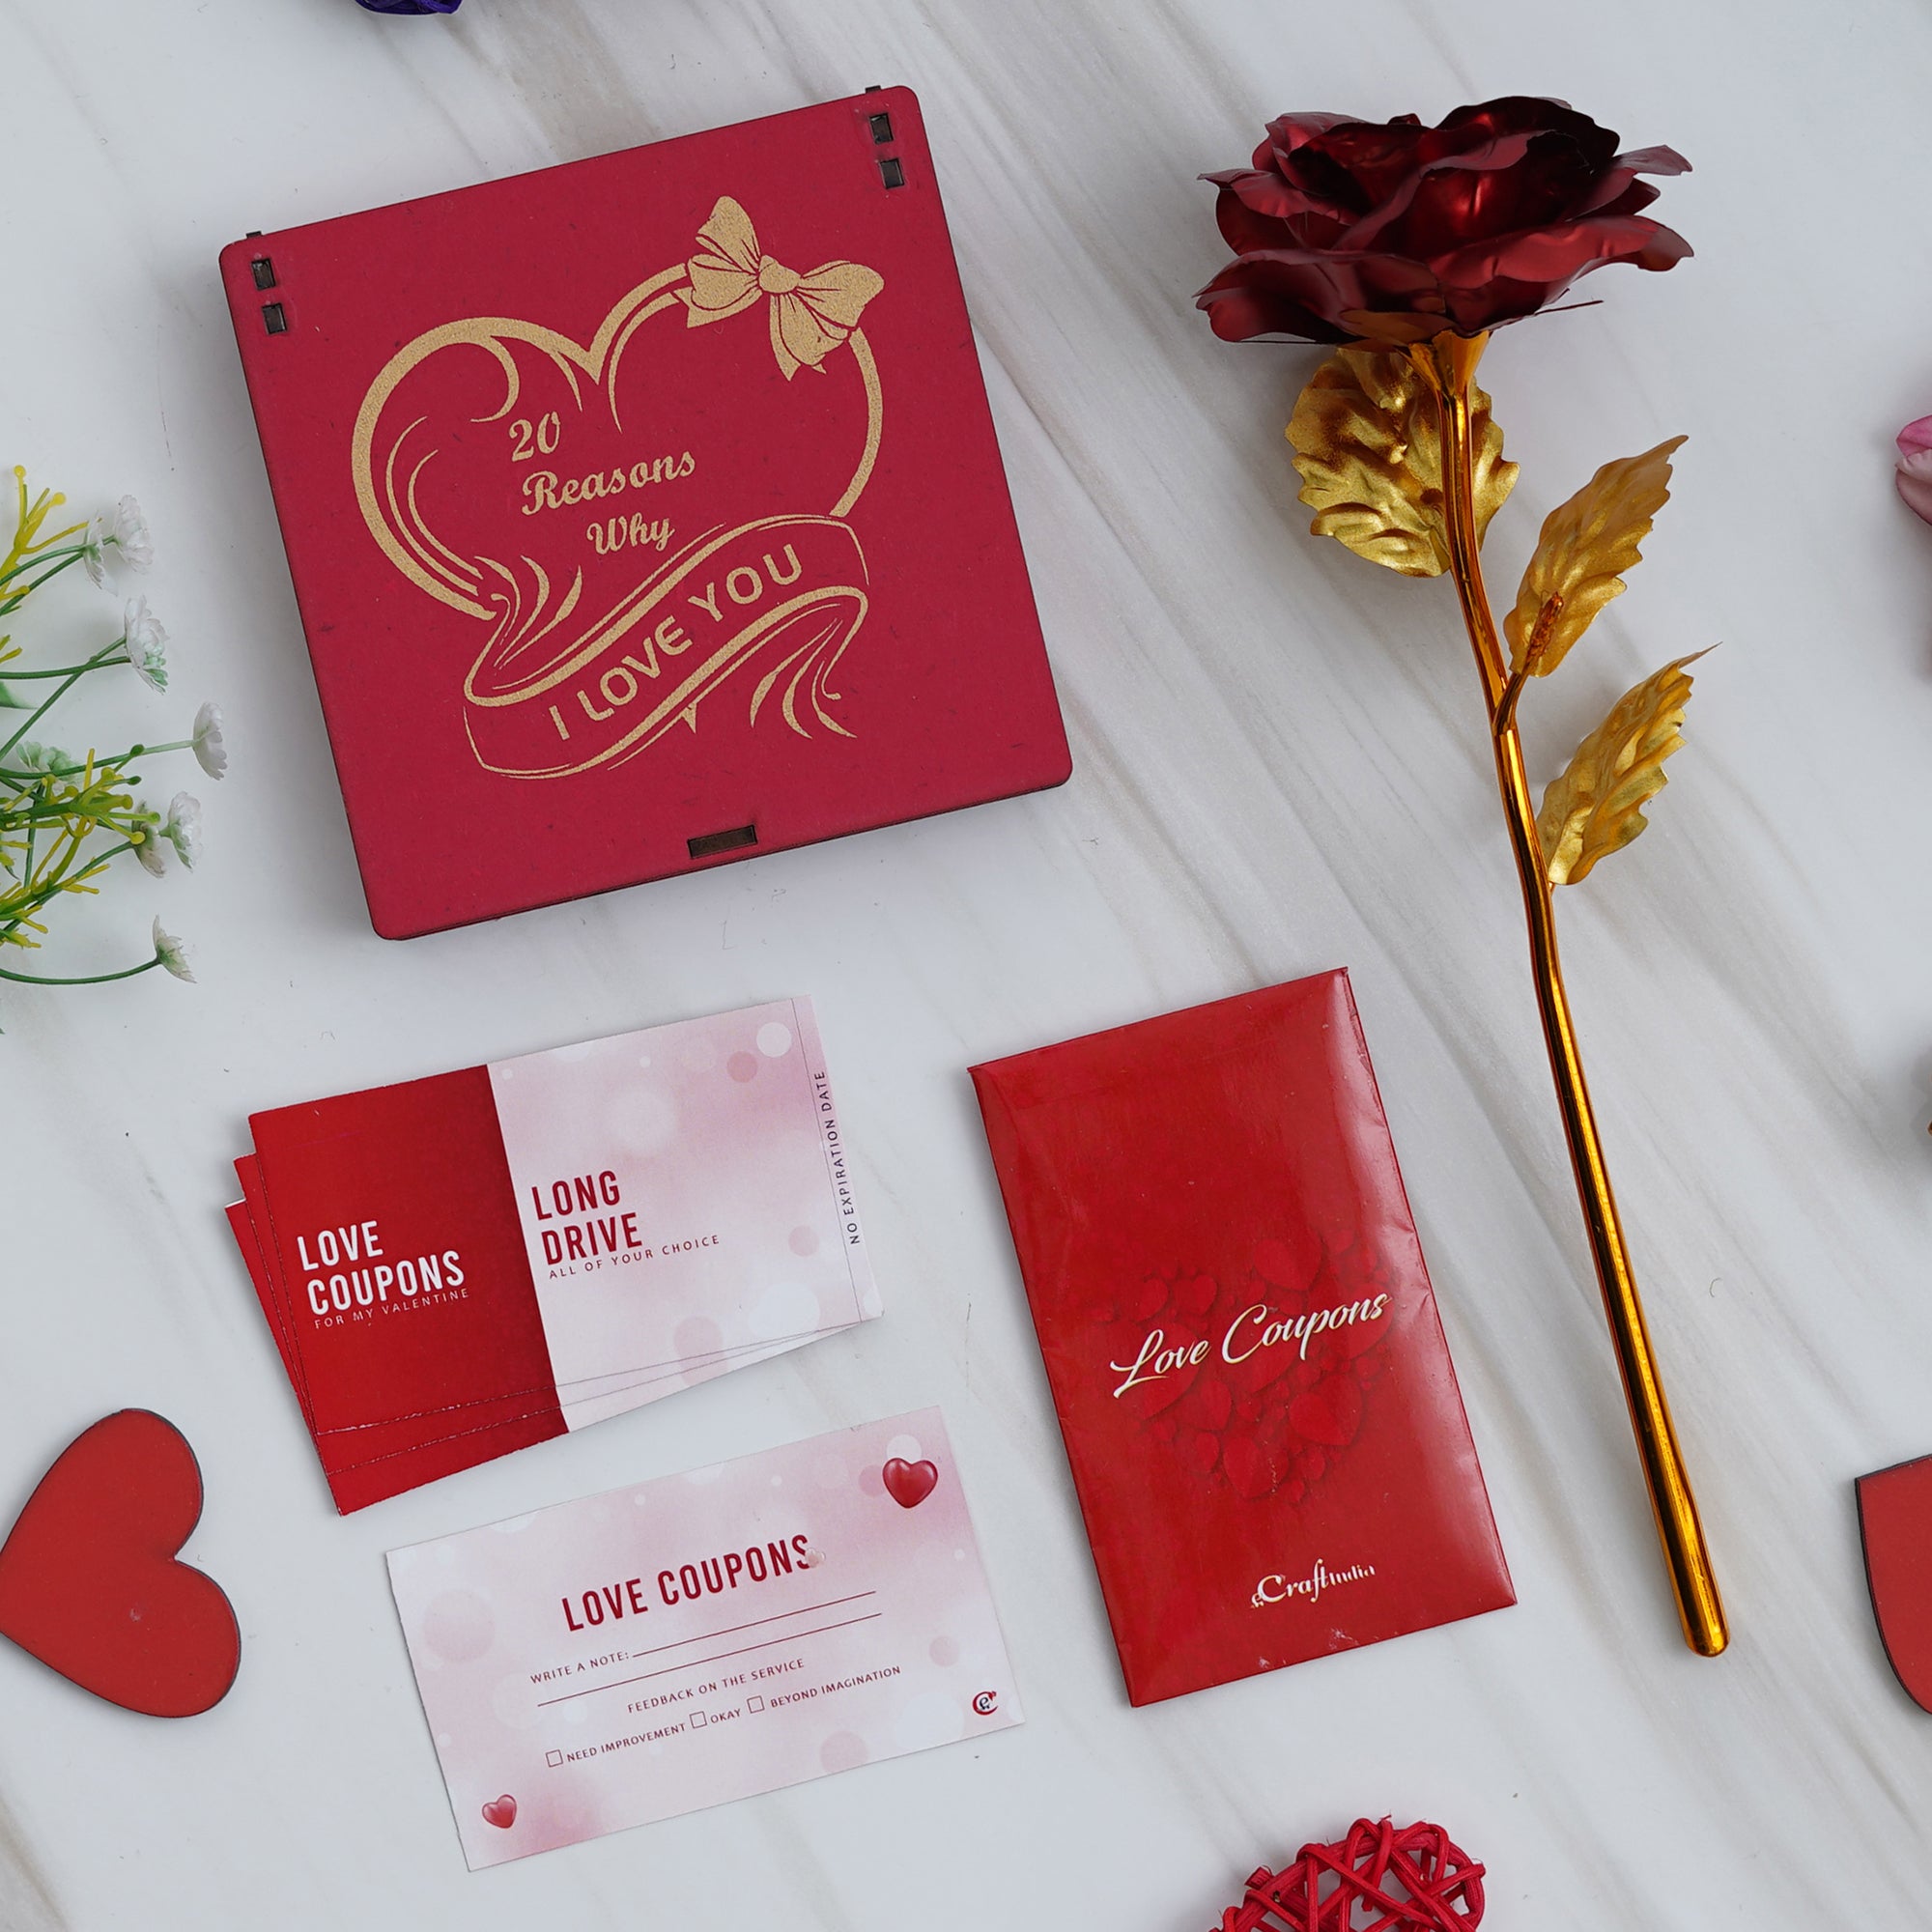 Valentine Combo of Pack of 12 Love Coupons Gift Cards Set, Golden Red Rose Gift Set, "20 Reasons Why I Love You" Printed on Little Red Hearts Decorative Wooden Gift Set Box